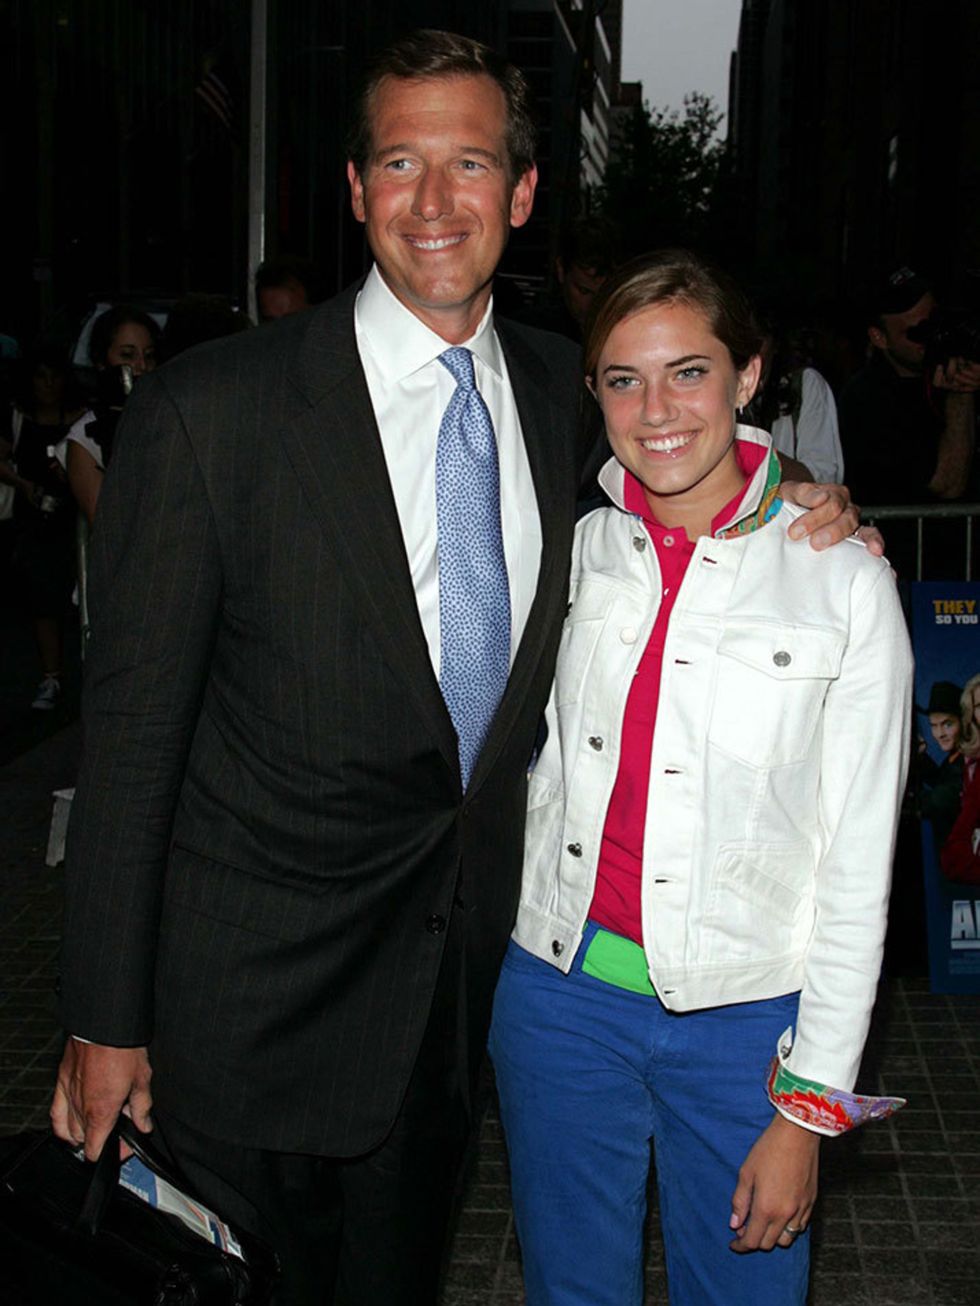 Allison Williams, 16, with her father Brian Williams

At the Anchorman premiere in 2004.